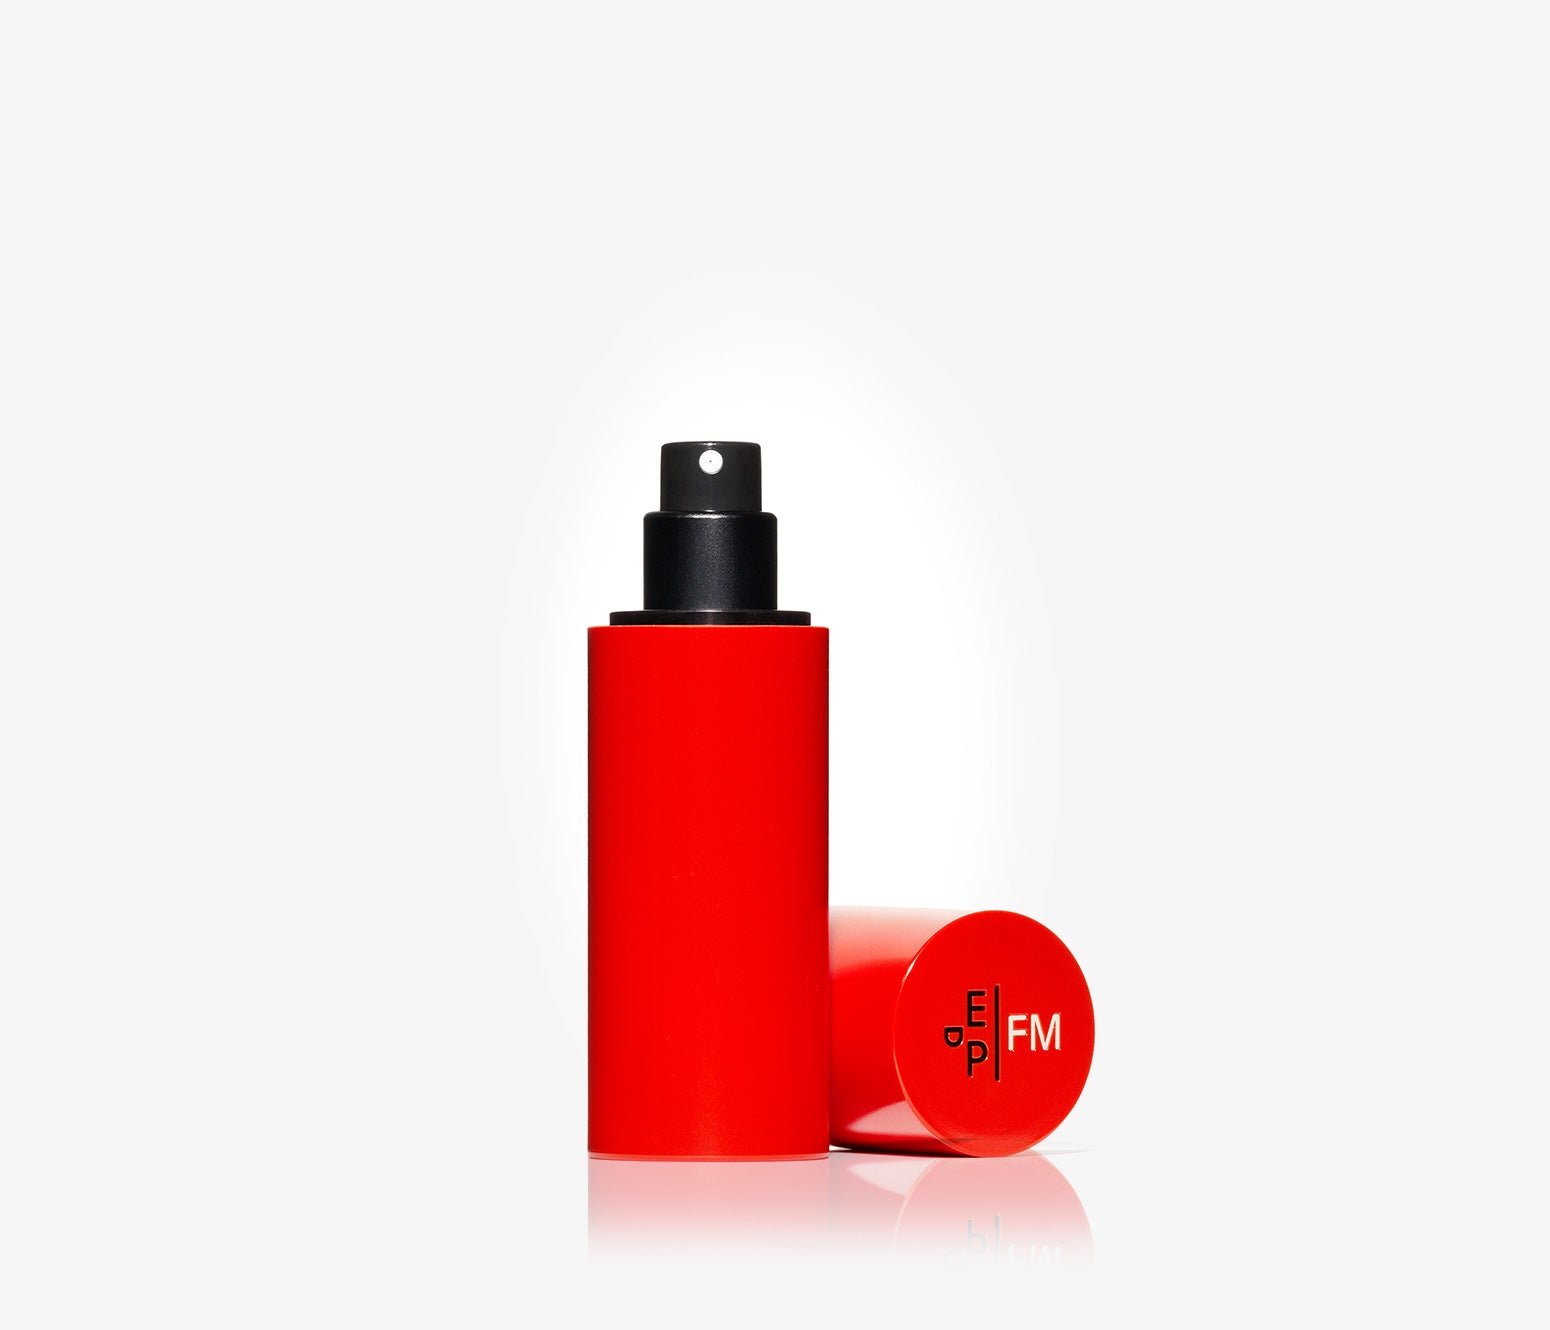 Frederic Malle - Signature Travel Spray Case - Red - FKO001 - Product Image - Fragrance - Les Senteurs